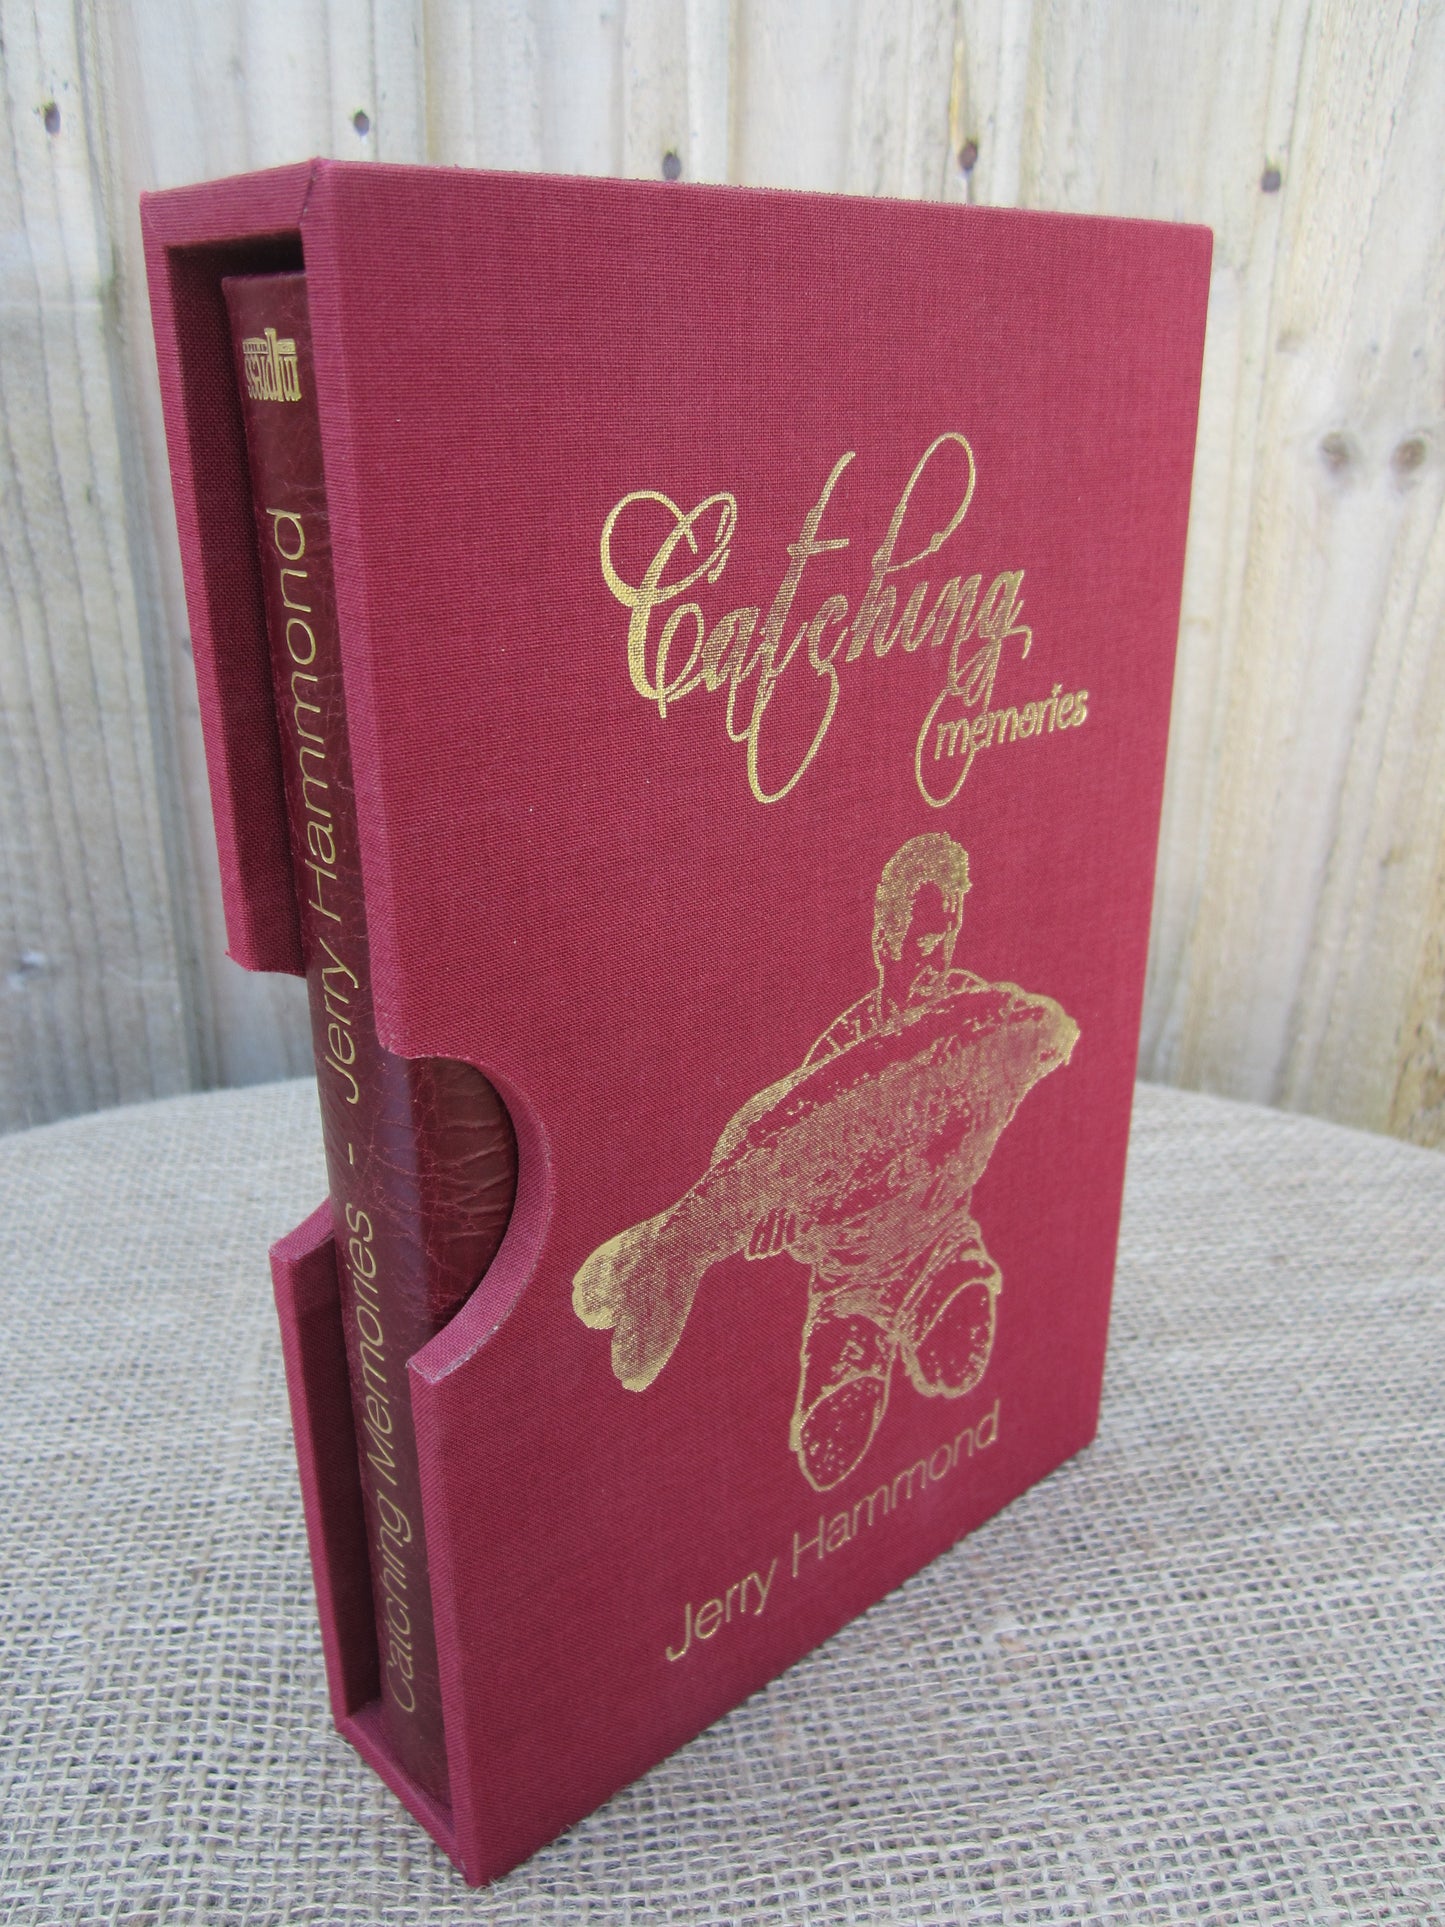 Catching Memories, By Jerry Hammond. Limited Edition Leather-Bound Copy. MINT.